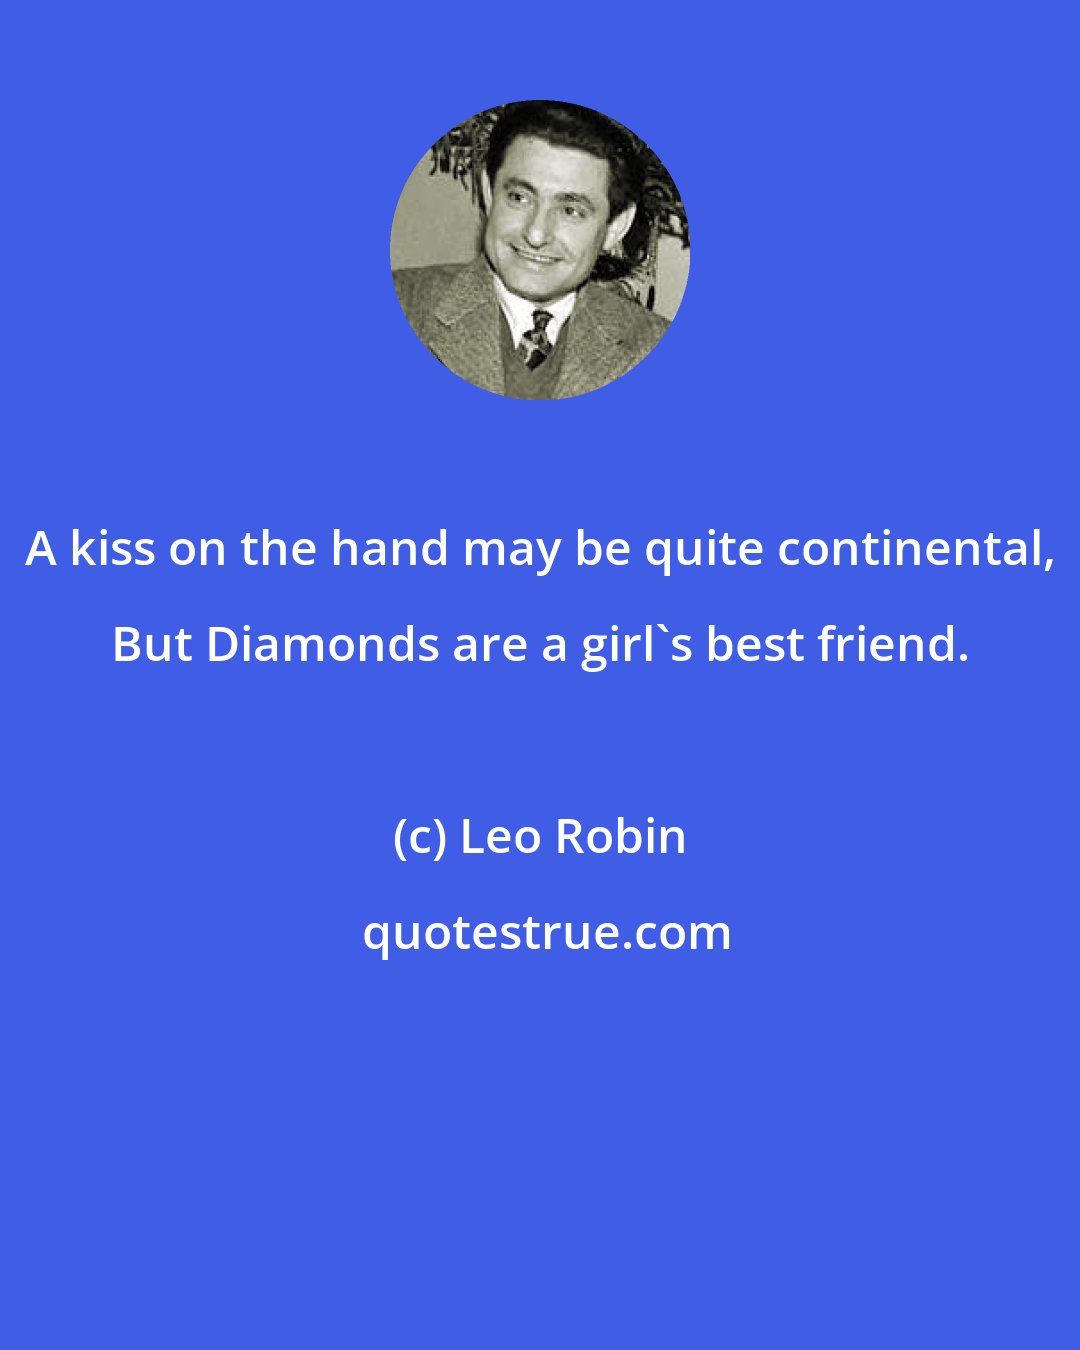 Leo Robin: A kiss on the hand may be quite continental, But Diamonds are a girl's best friend.